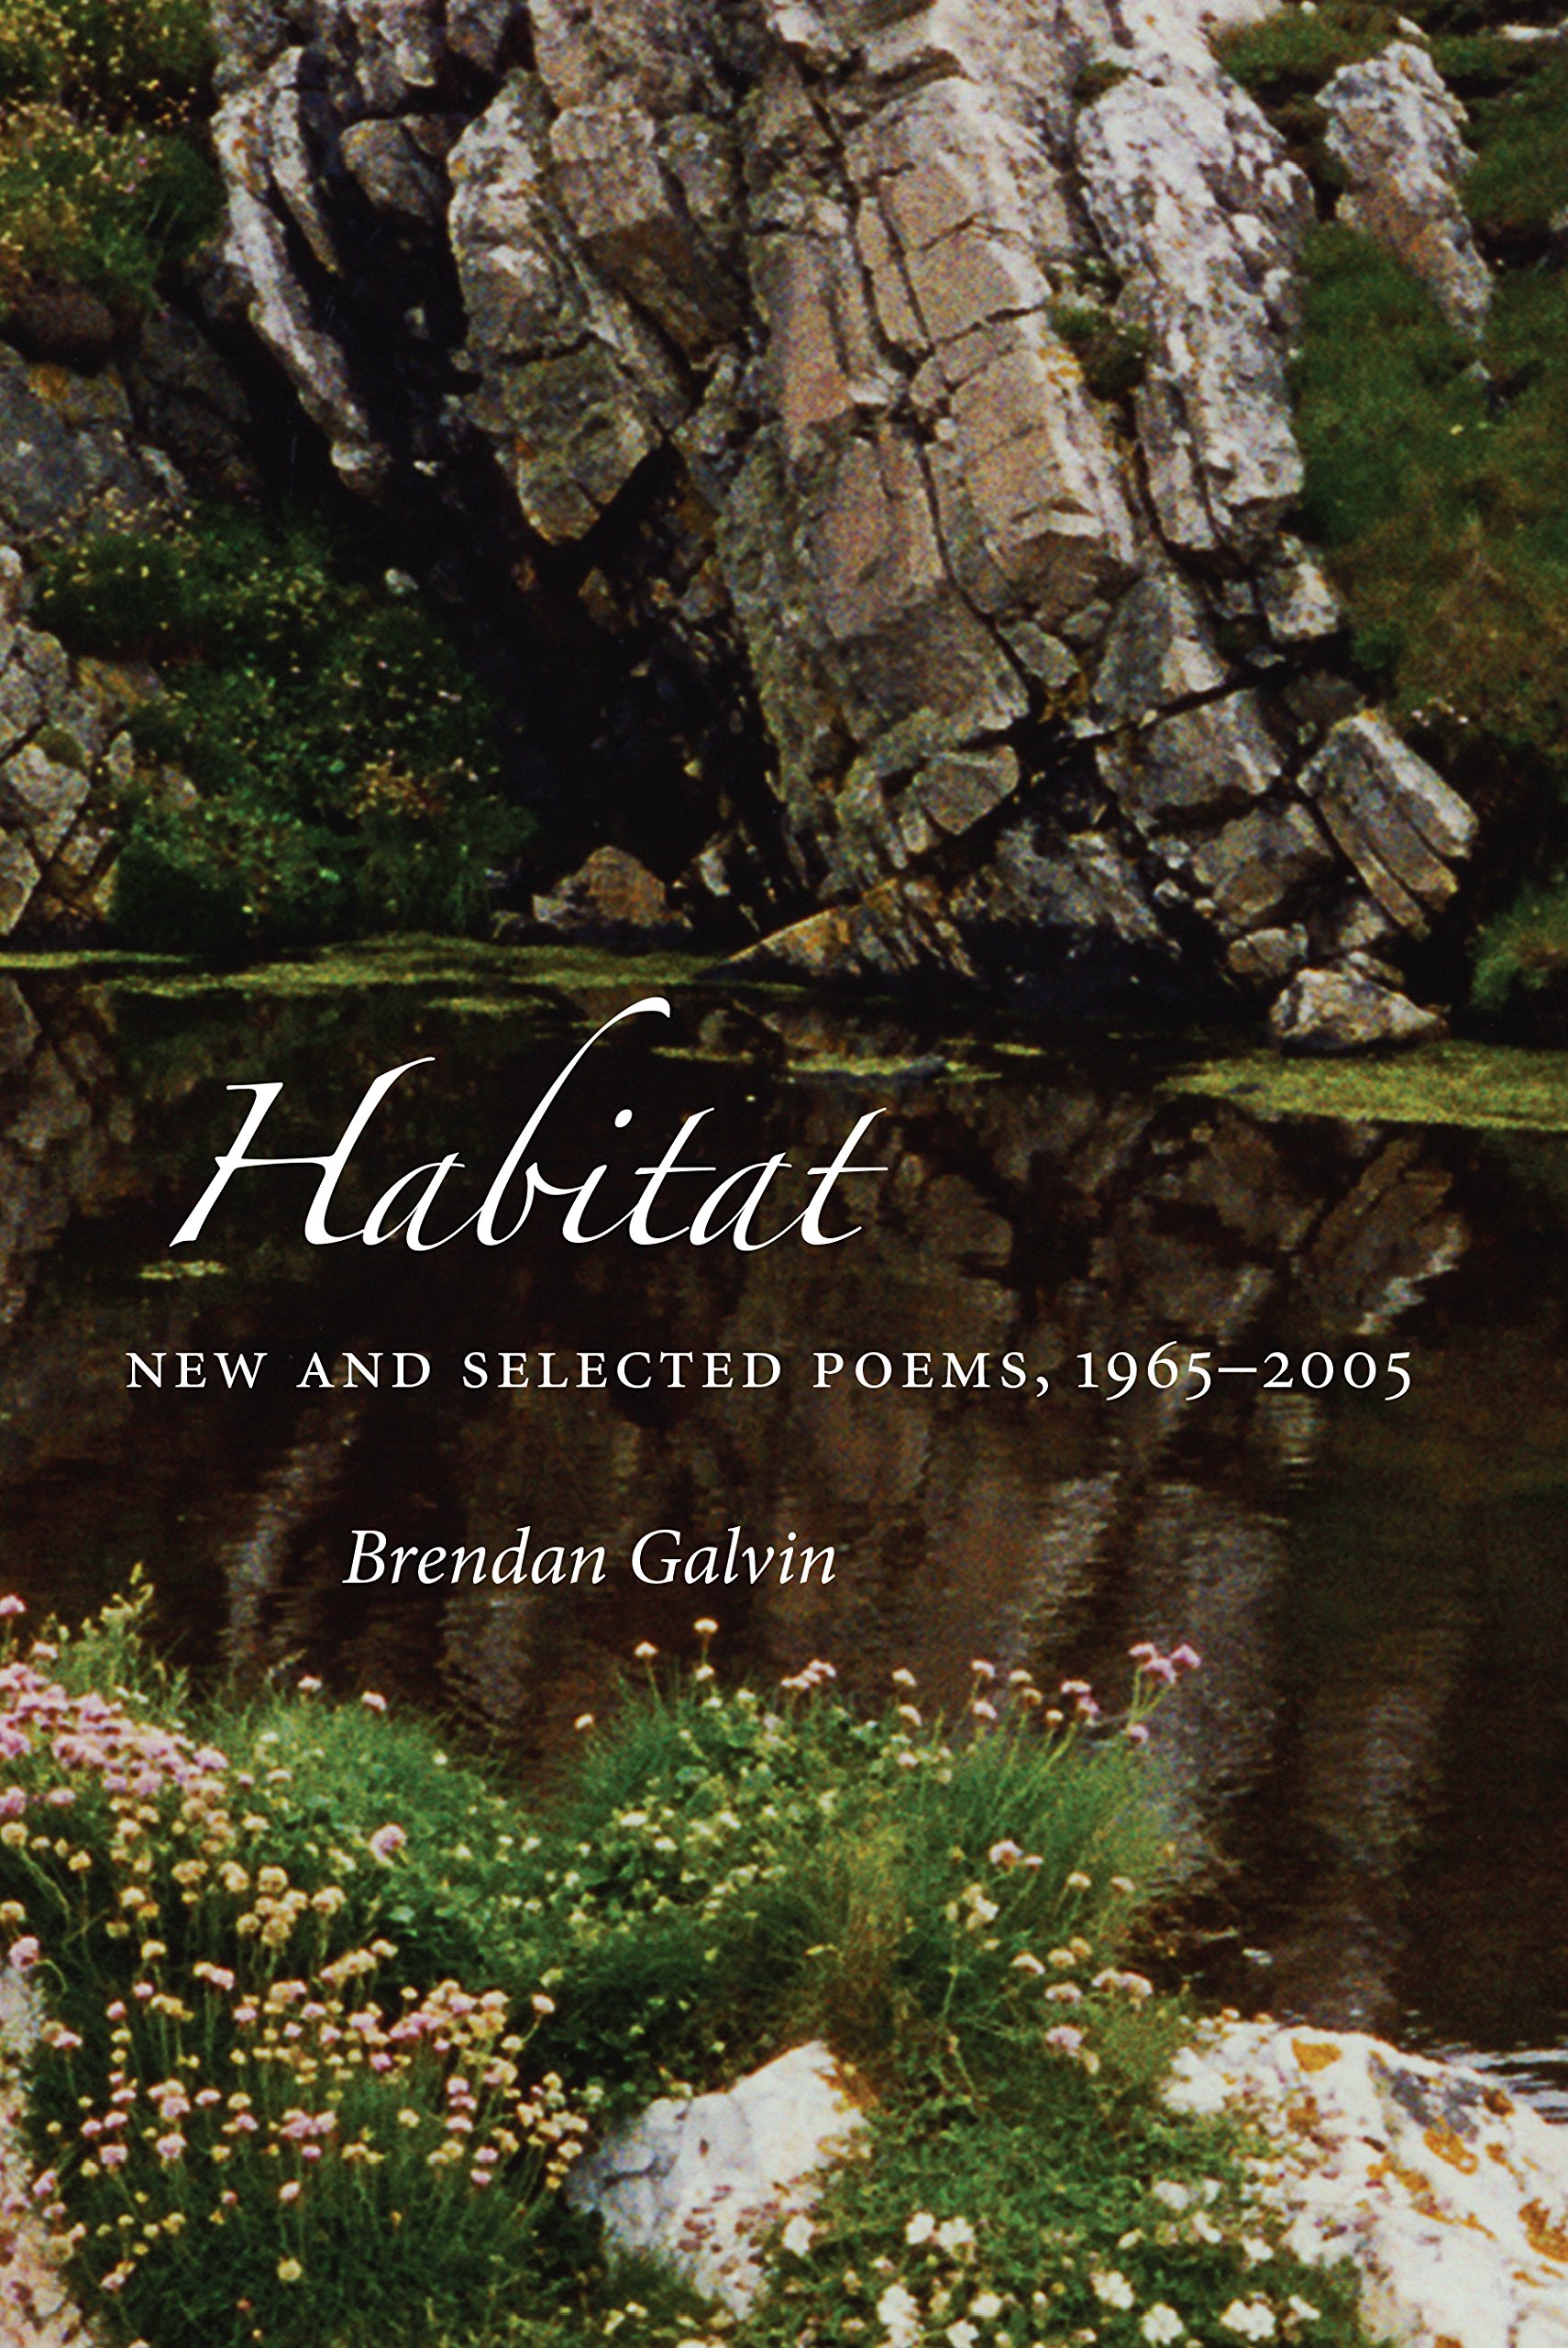 Habitat: New and Selected Poems 1965-2005